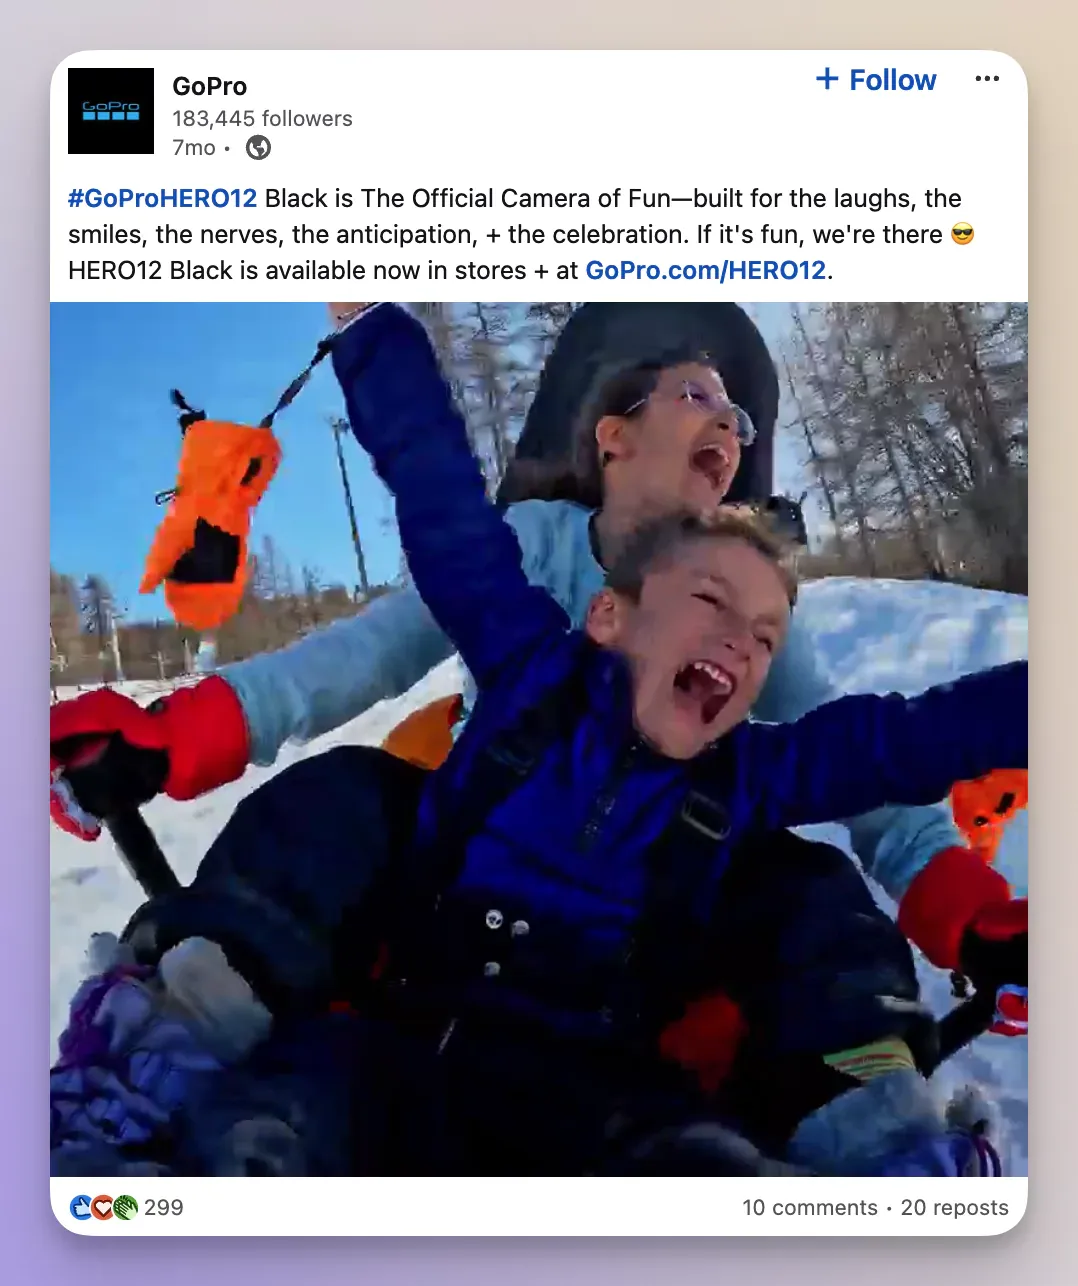 Here's a example from GoPro which incorporates UGC into a LinkedIn strategy